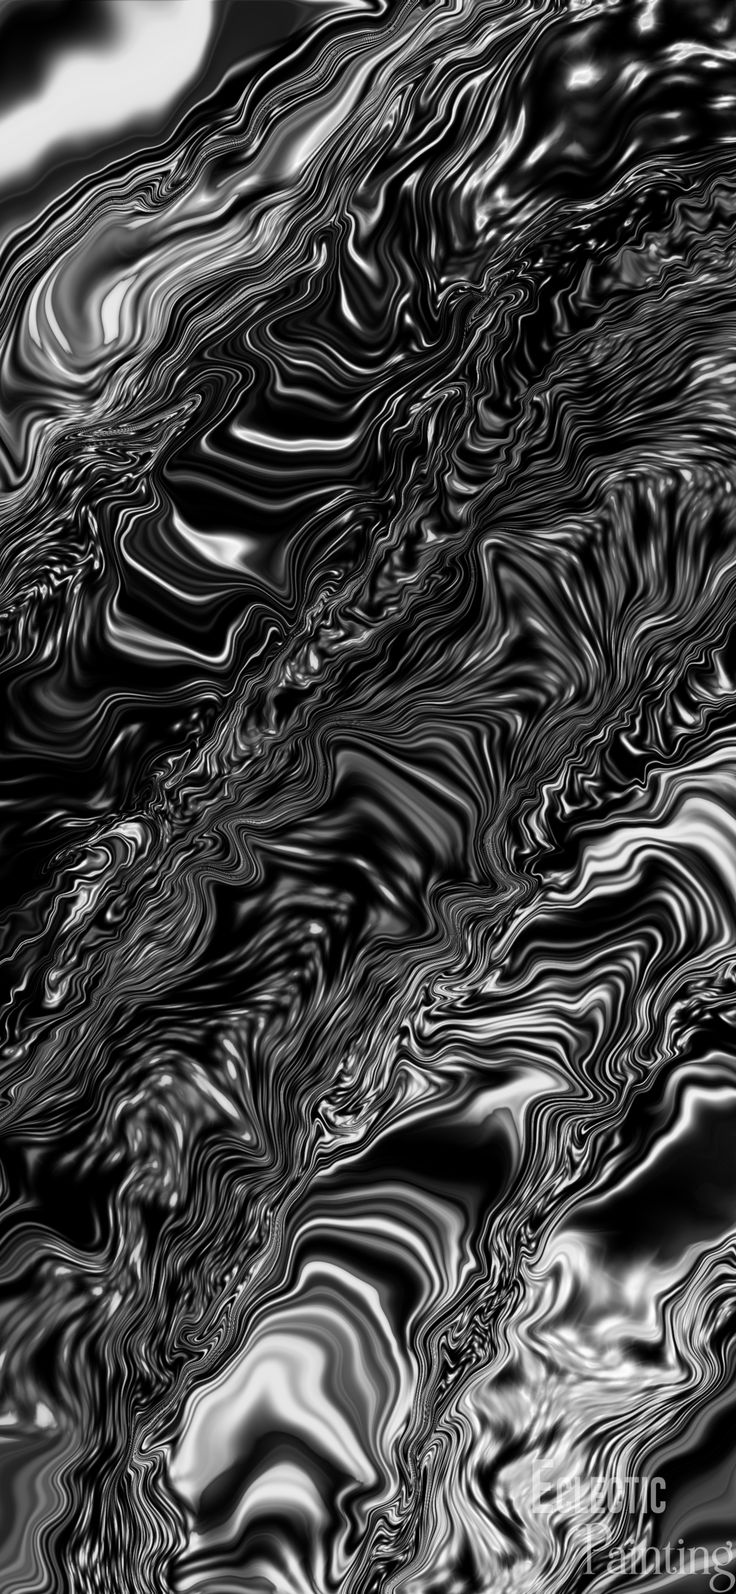 Download Free HD iPhone Wallpaper With Abstract Dark Black and White Swirls. Eclectic paintings, Free iphone wallpaper, Unique iphone wallpaper